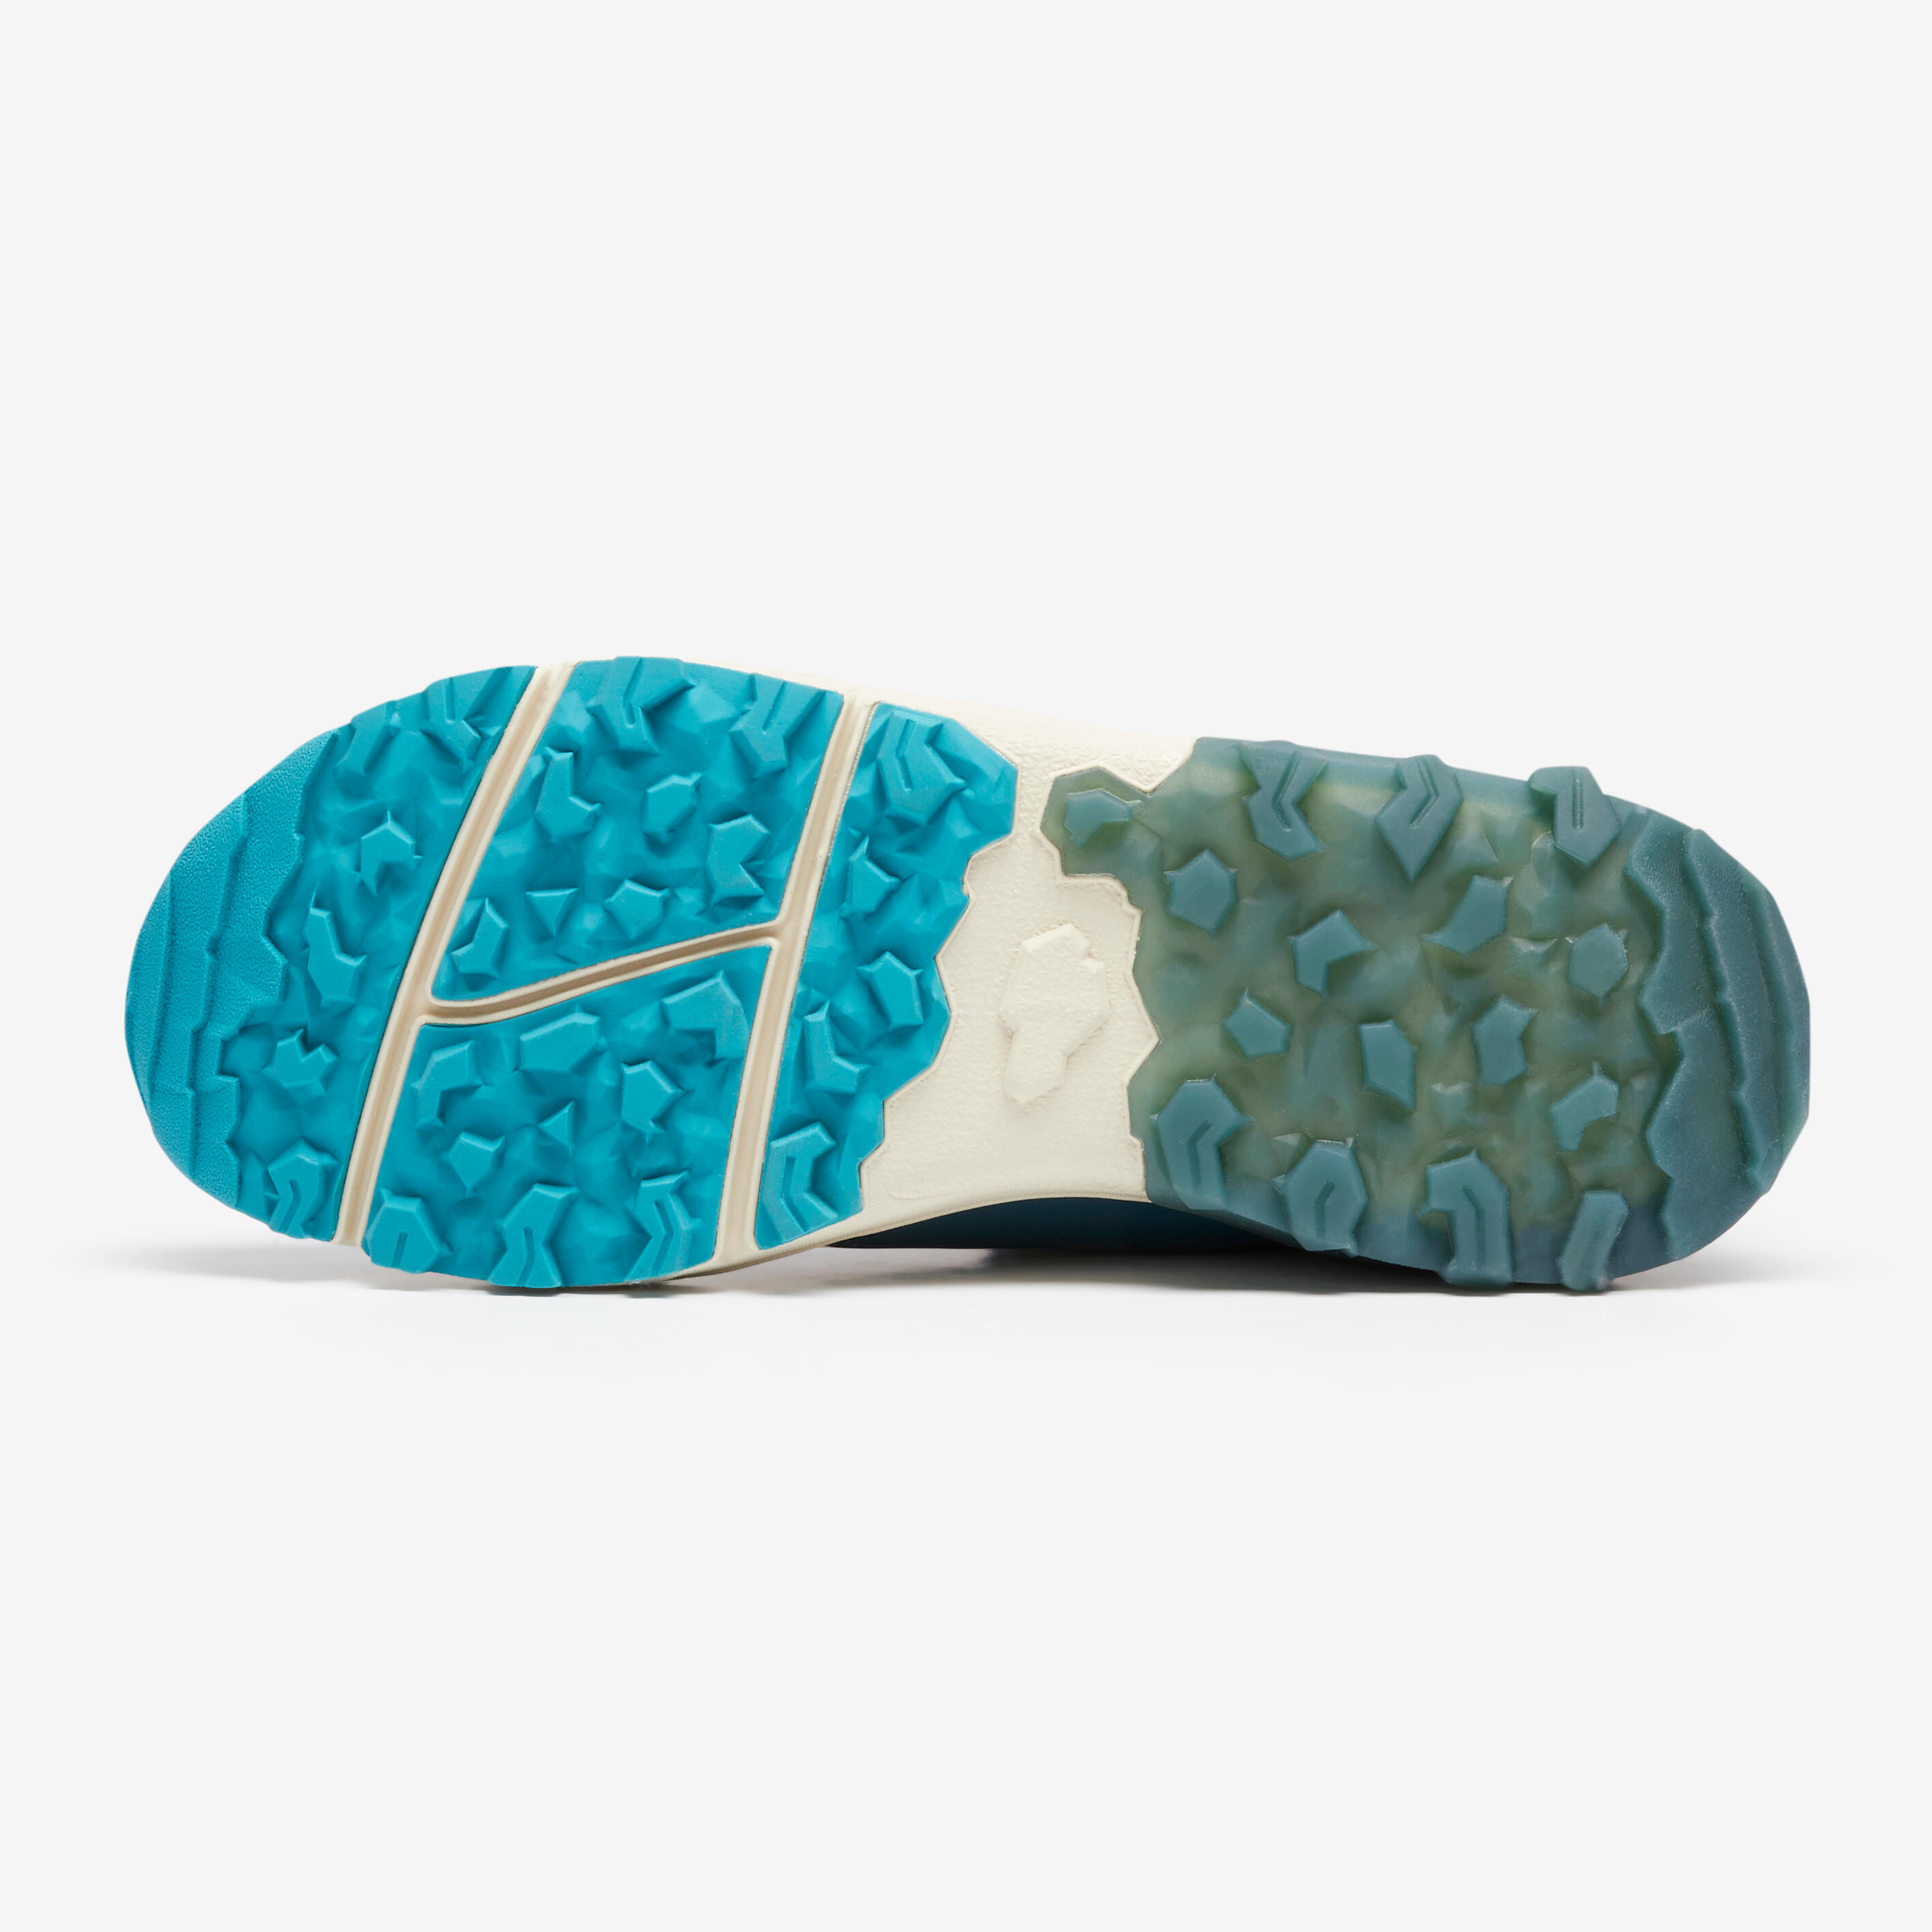 NW 500 Nordic Walking Breathable Shoes - Turquoise 2/8